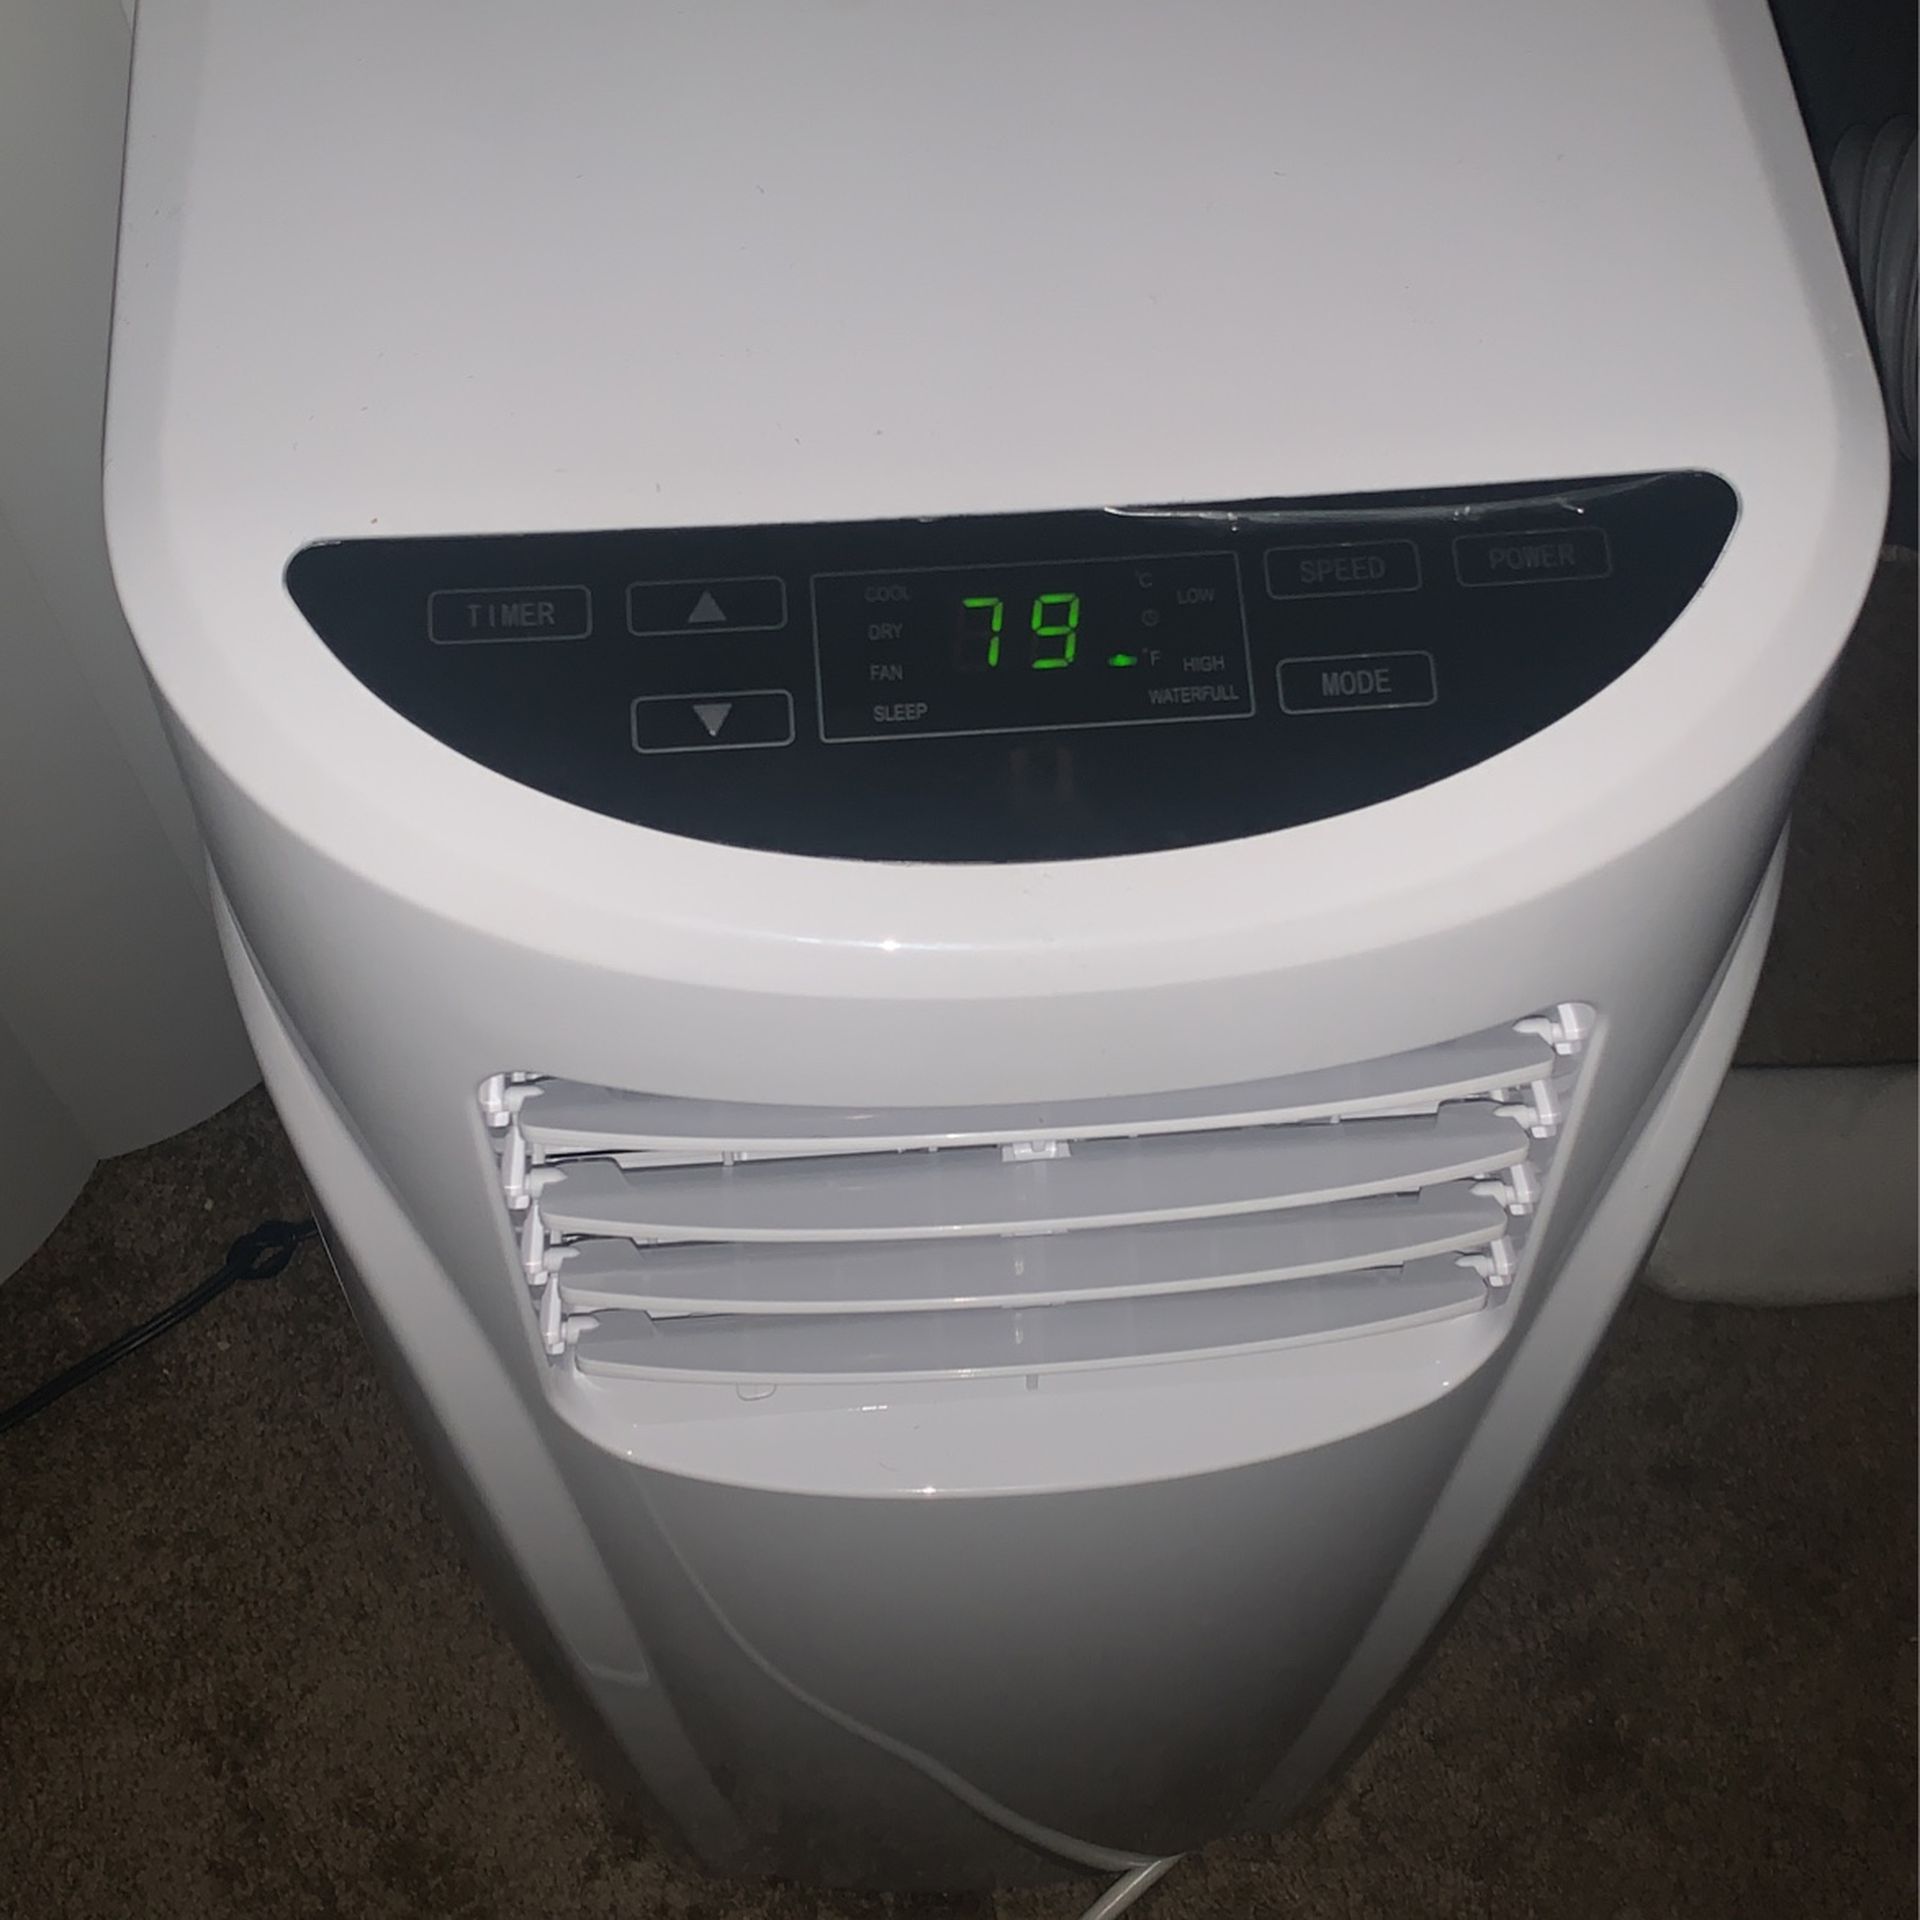 Portable Ac Unit. Cools Great, 8000 BTU With Remote